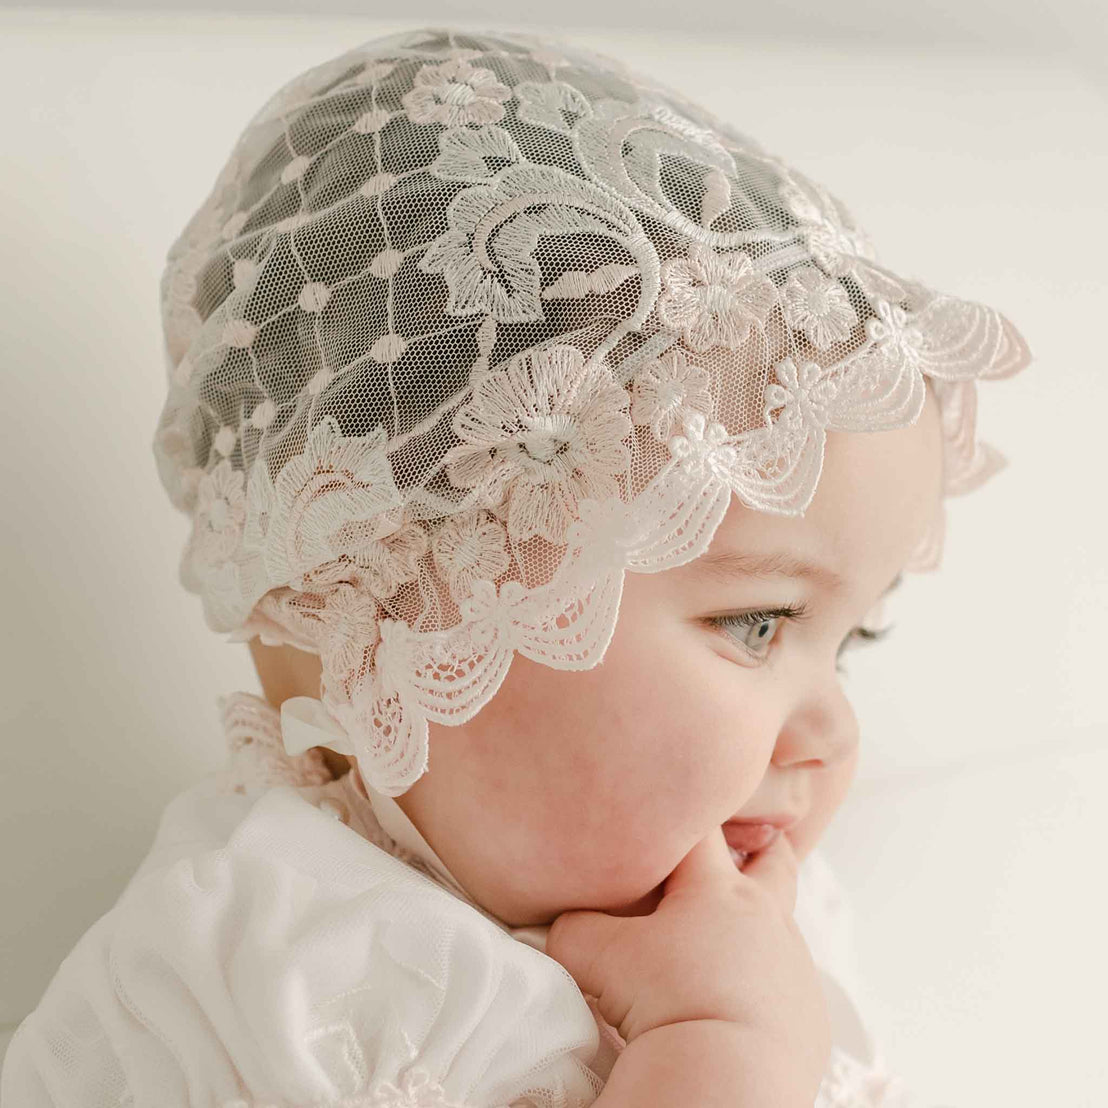 A baby wearing a Joli Sheer Bonnet gazes thoughtfully into the distance, her hand resting gently on her chin.